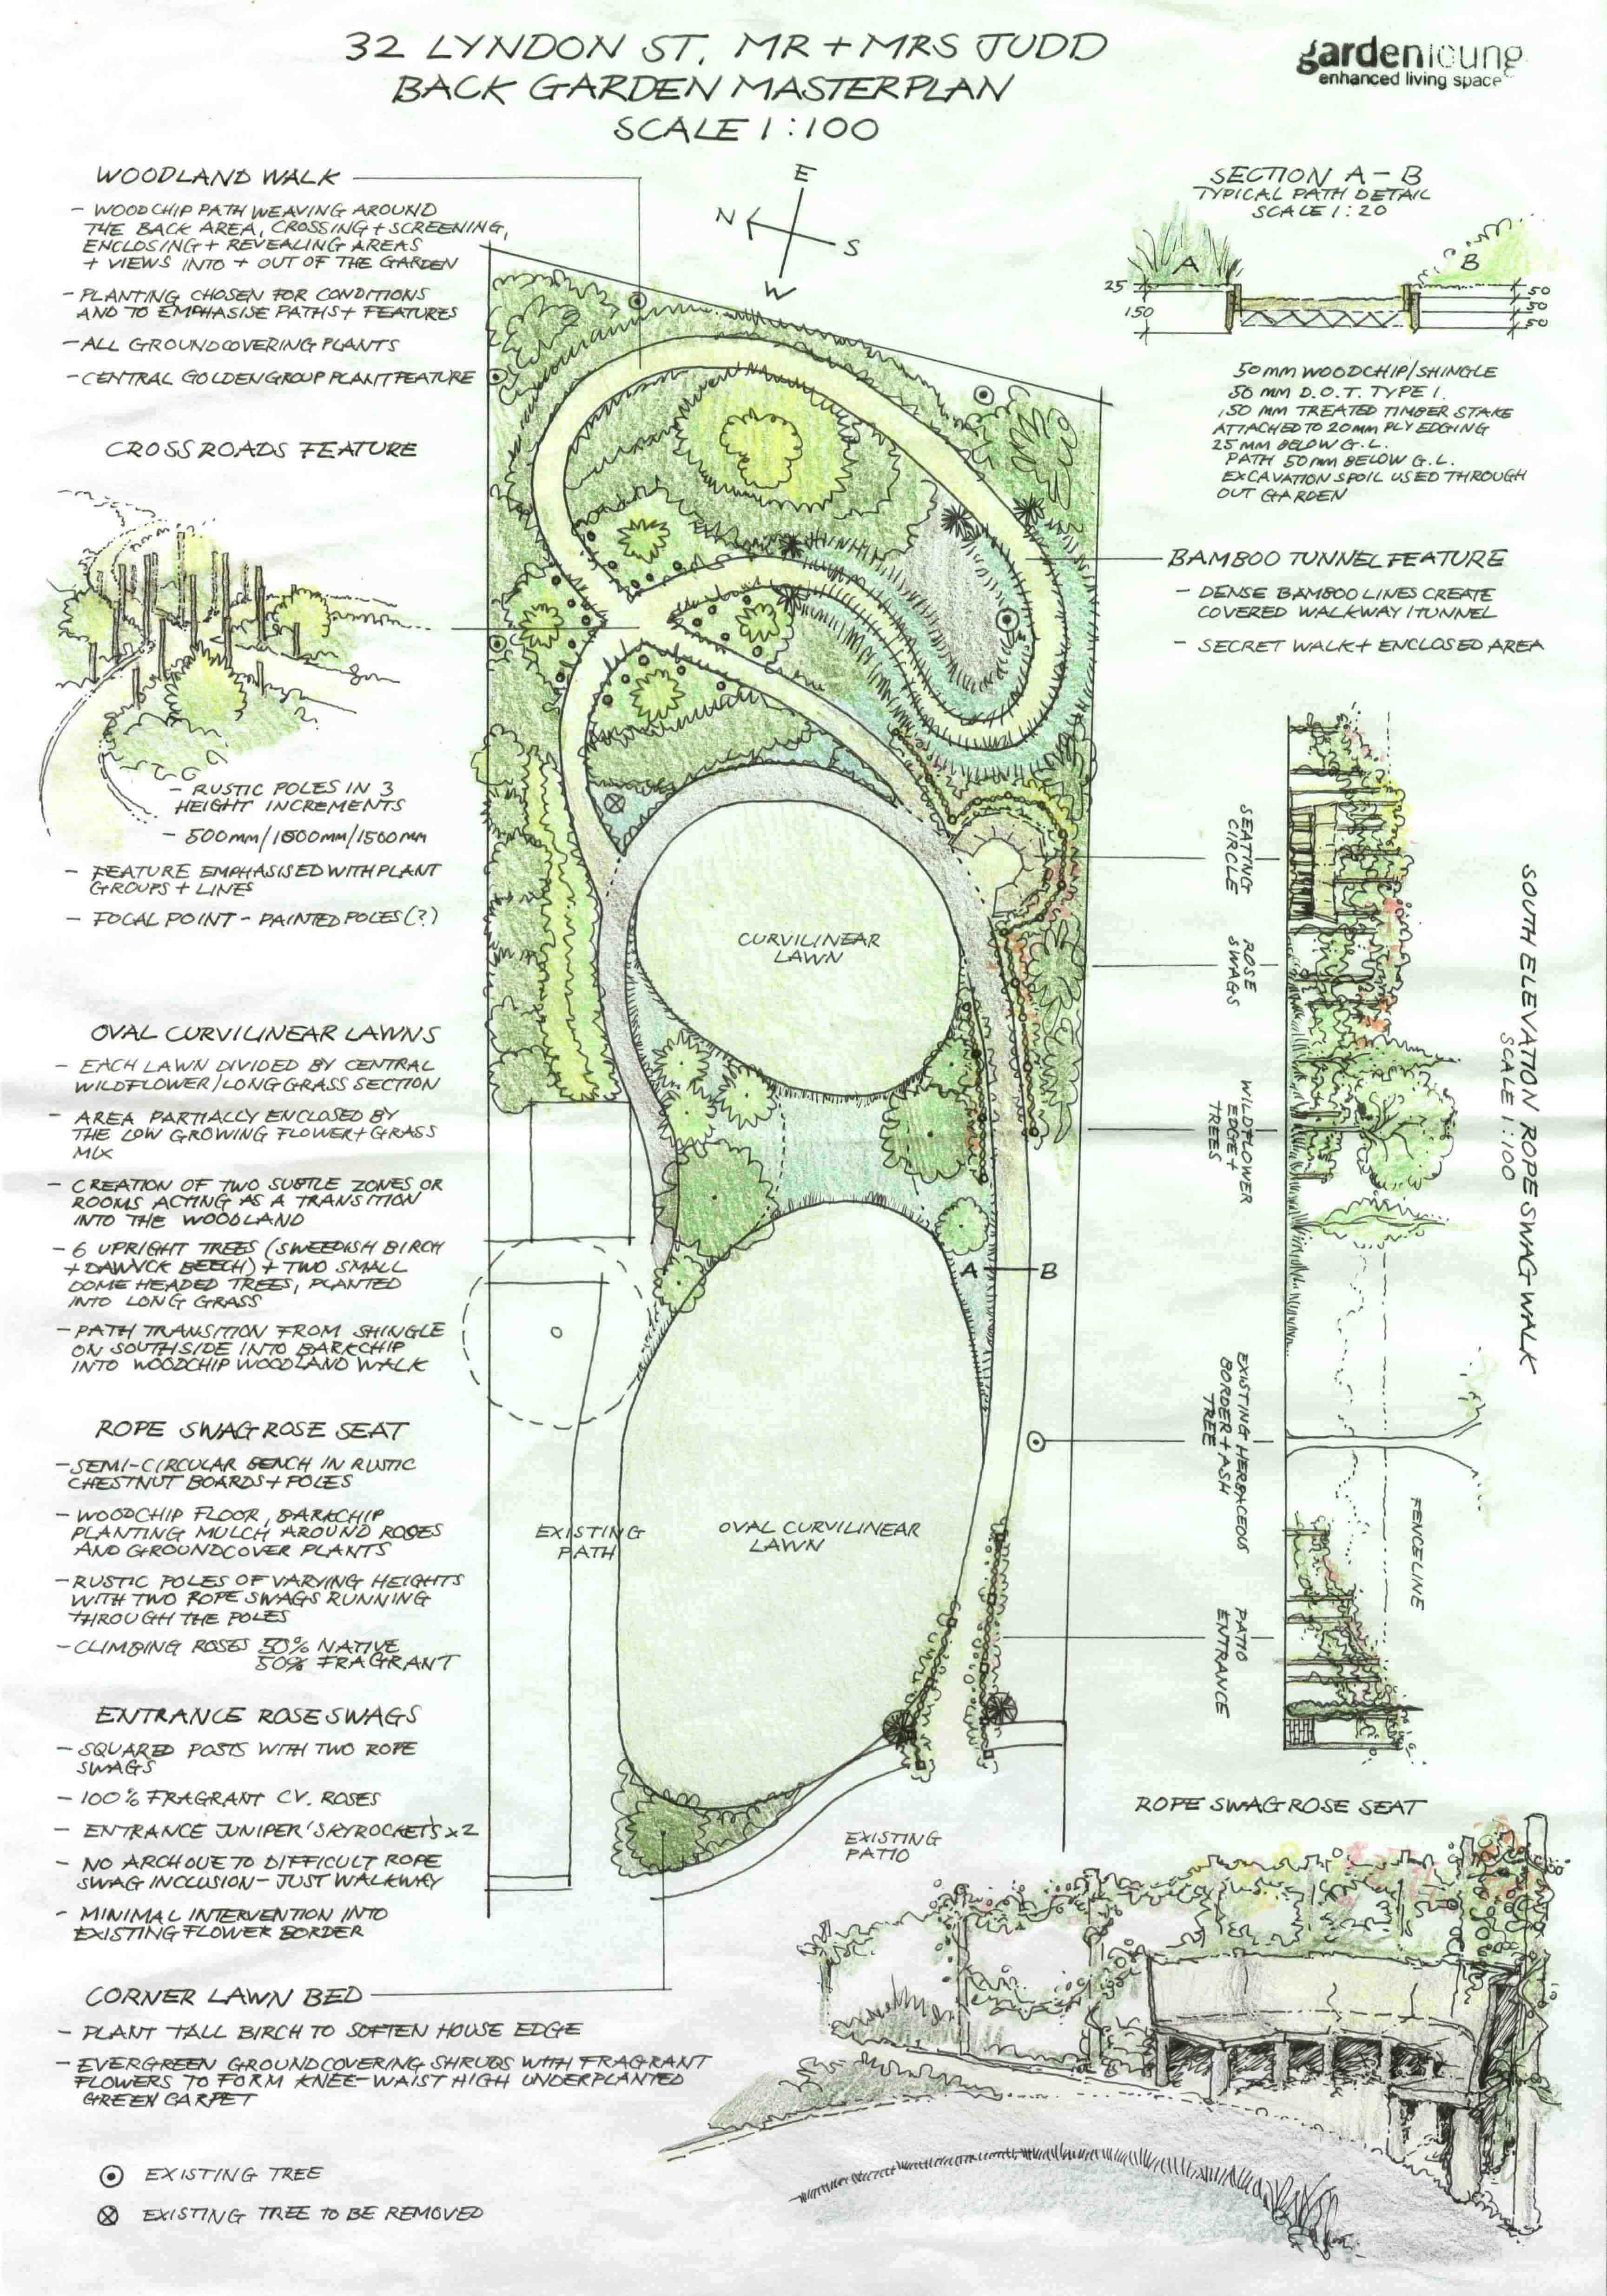 Coloured garden design plan of the shady garden with vignettes of the softwood pole crossroads and the rose swag seating area